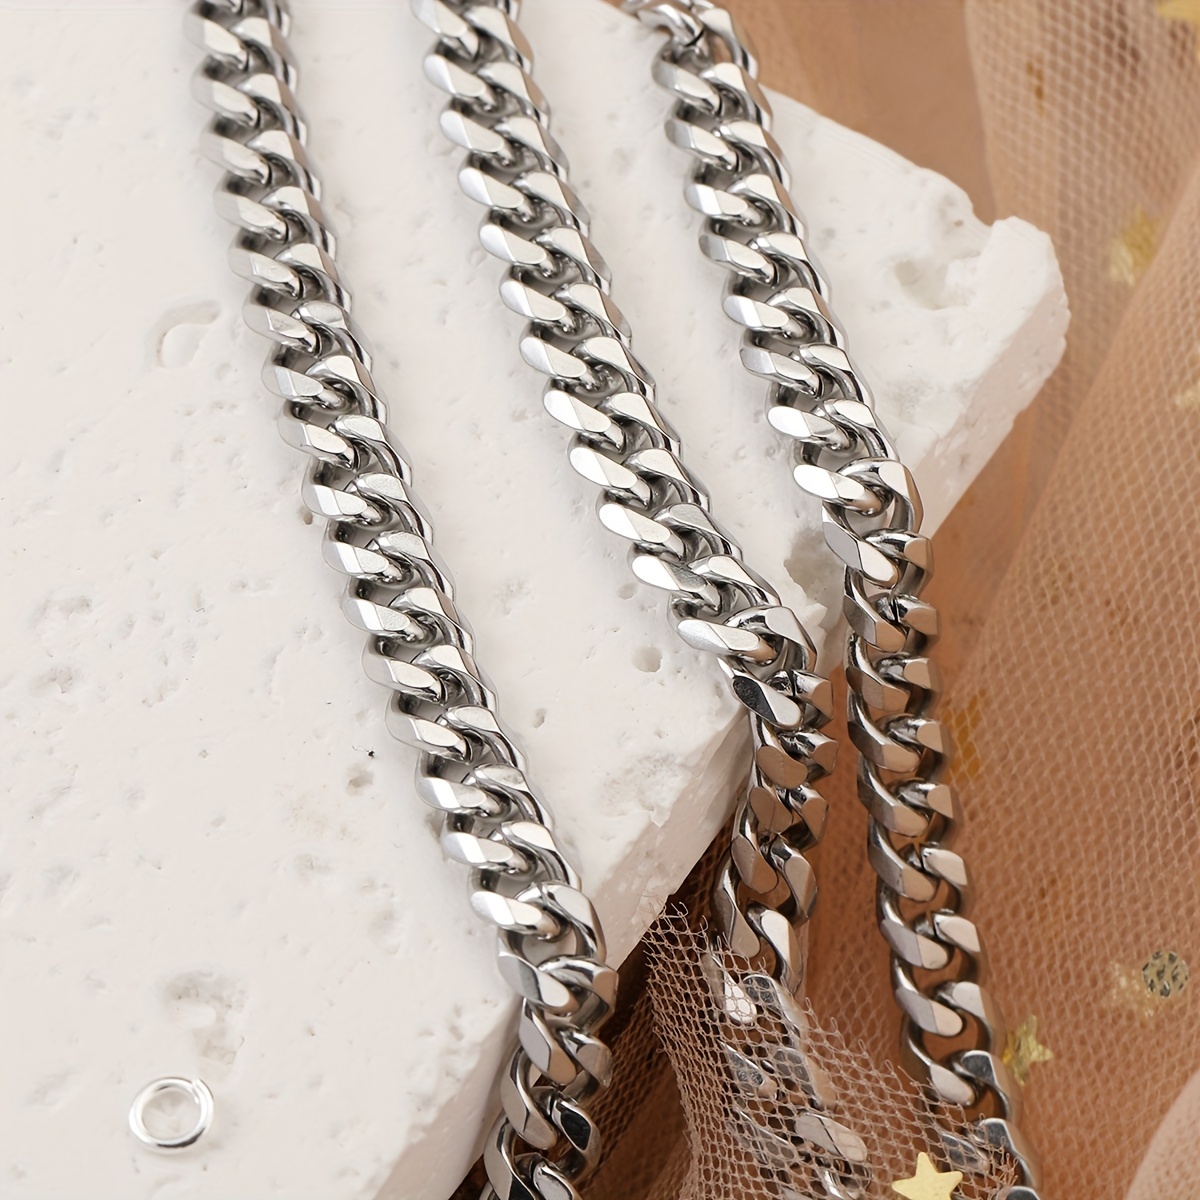 Craft Chain, DIY Making Sturdy Elegant Curb Chain For Anklets NK7/8 